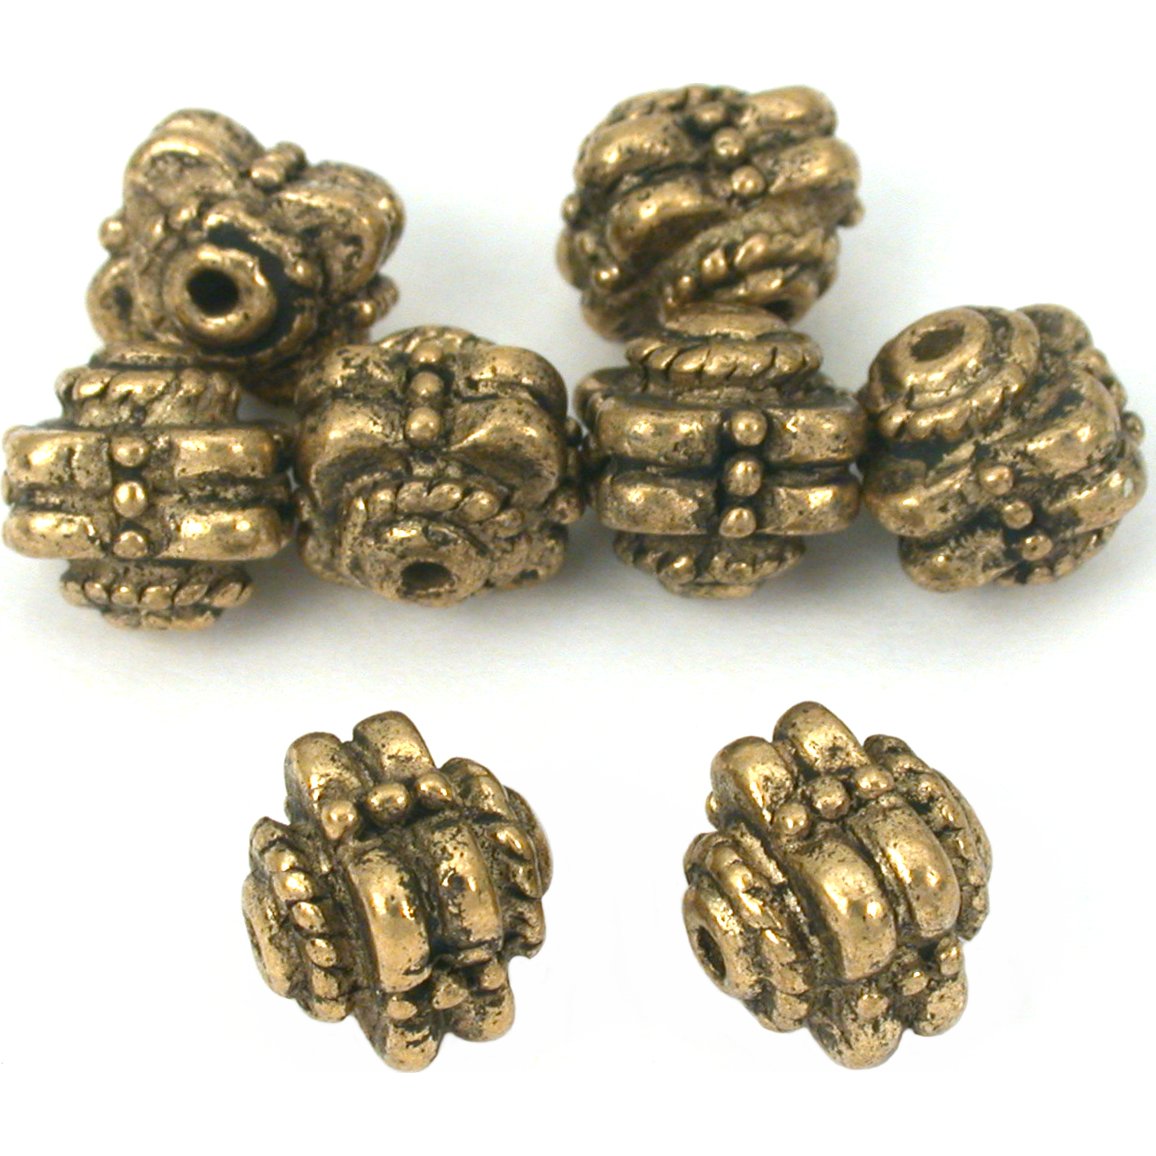 Bali Flower Antique Gold Plated Beads 9mm 8Pcs Approx.